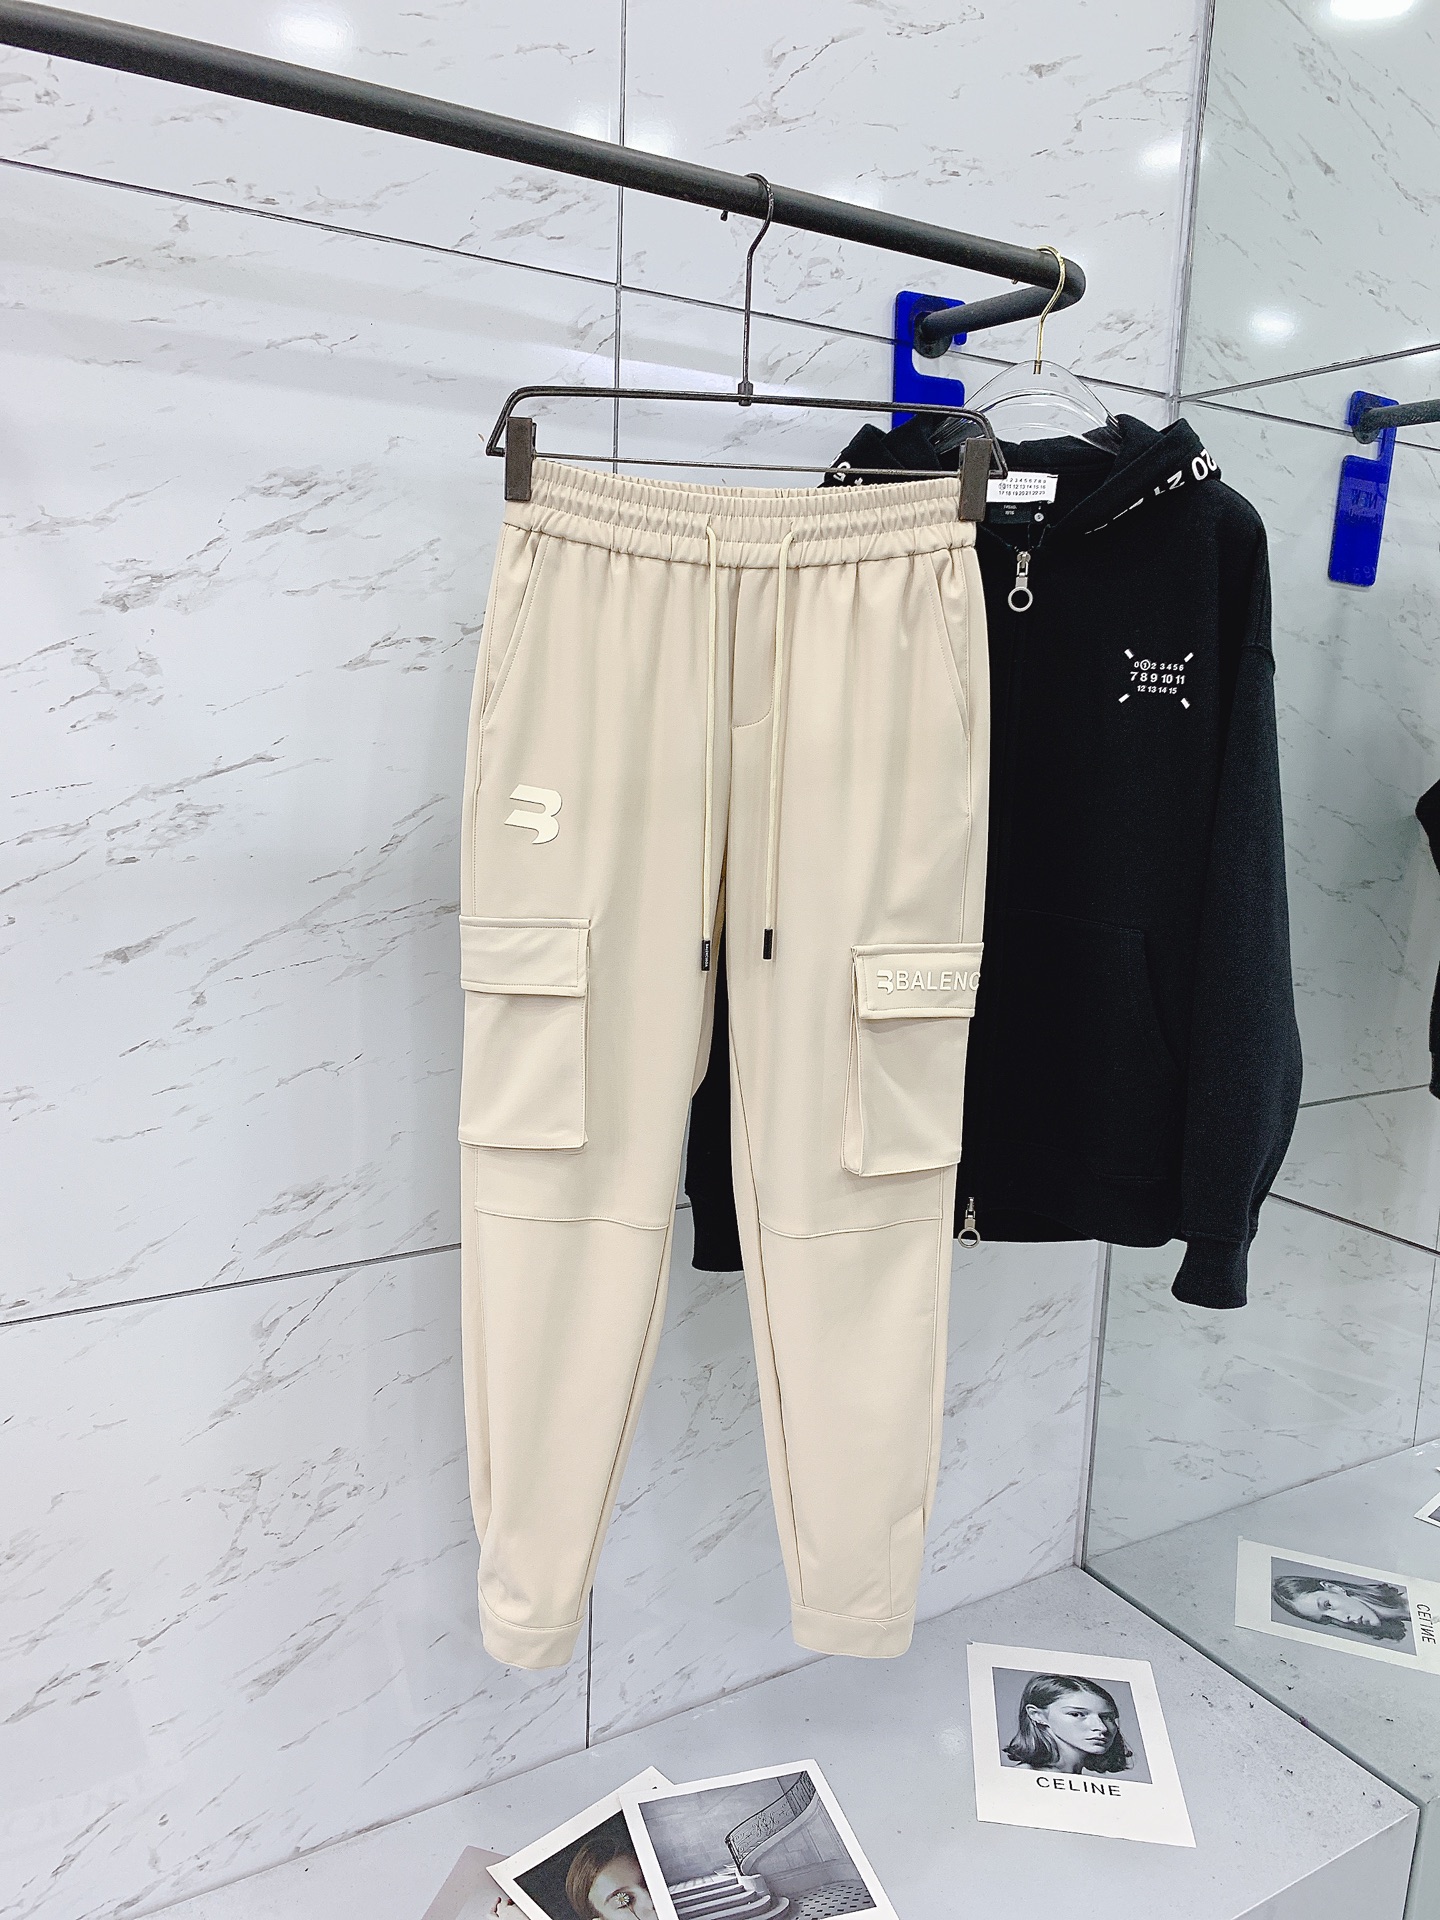 7 Star Collection
 Balenciaga Clothing Pants & Trousers Outlet Sale Store
 Knitting Fall/Winter Collection Vintage Casual